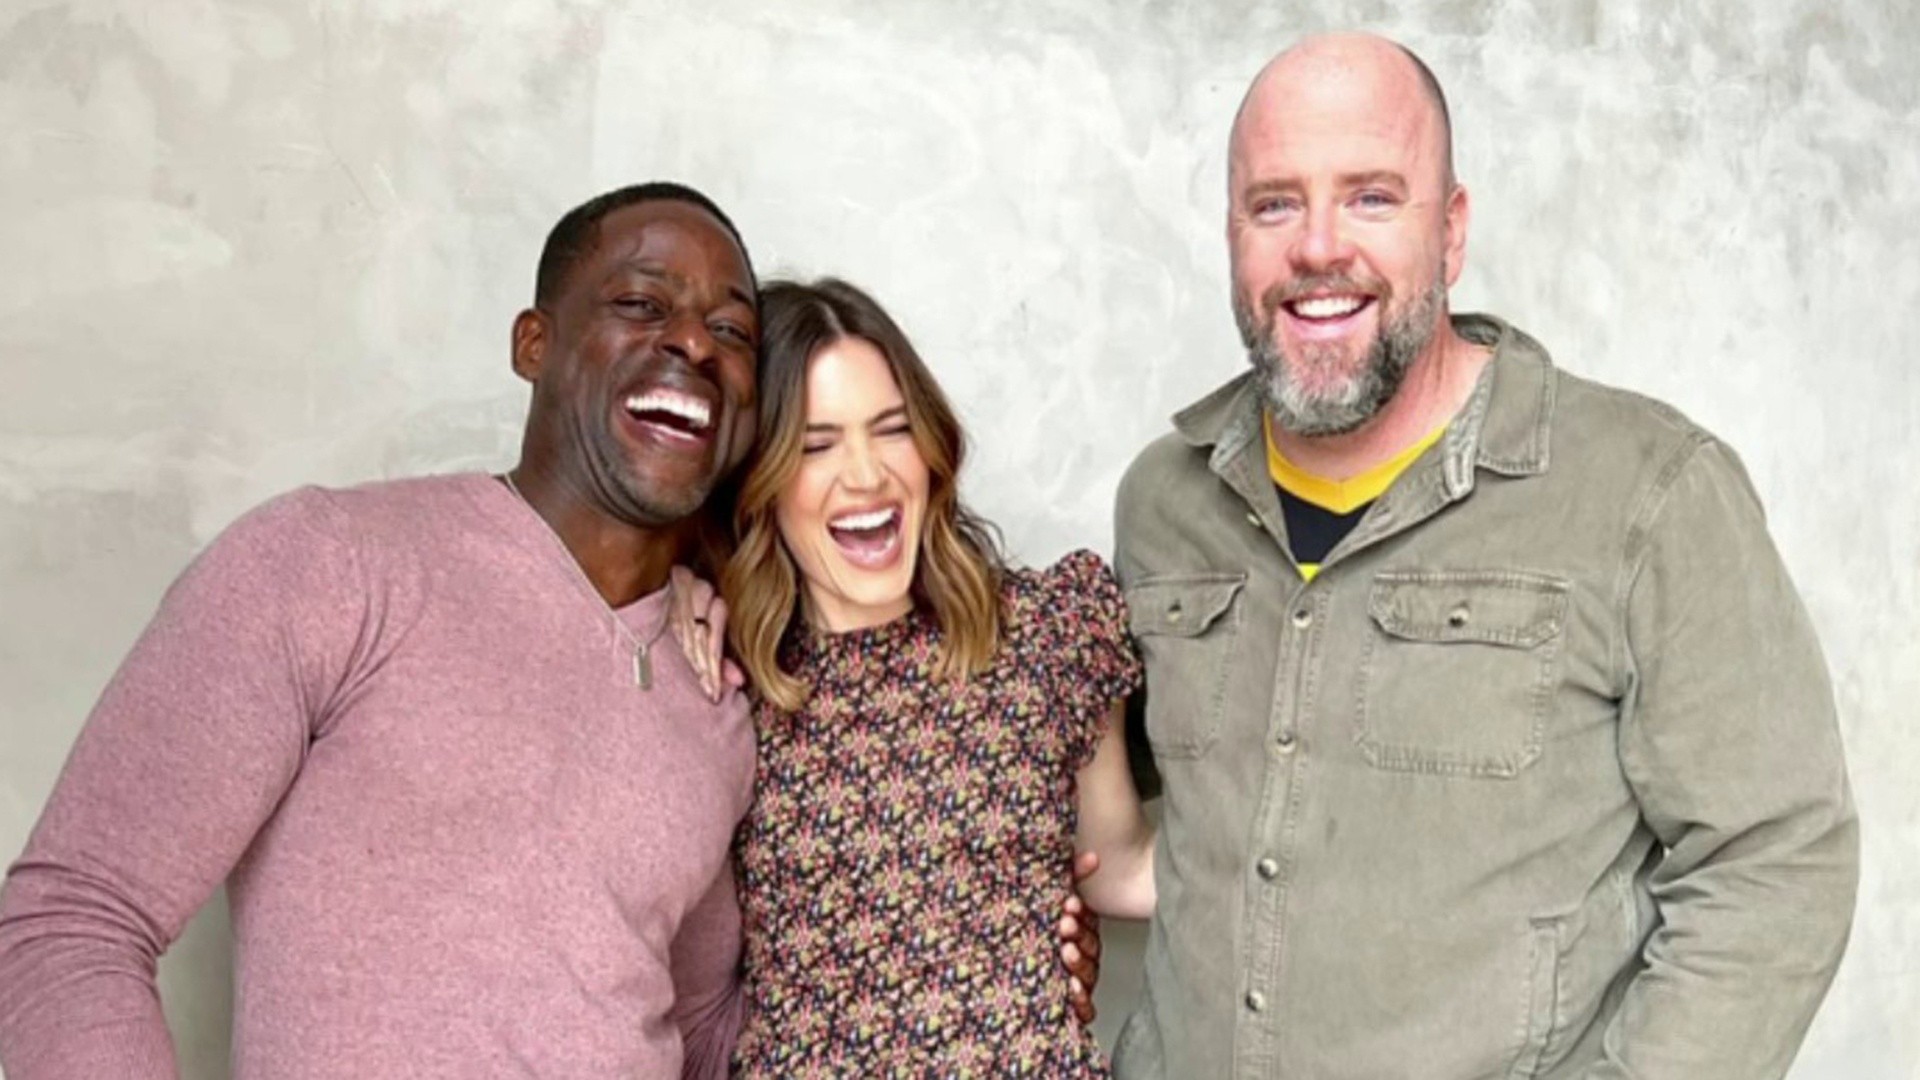 'This is Us' stars to reunite for new podcast called 'That Was Us'